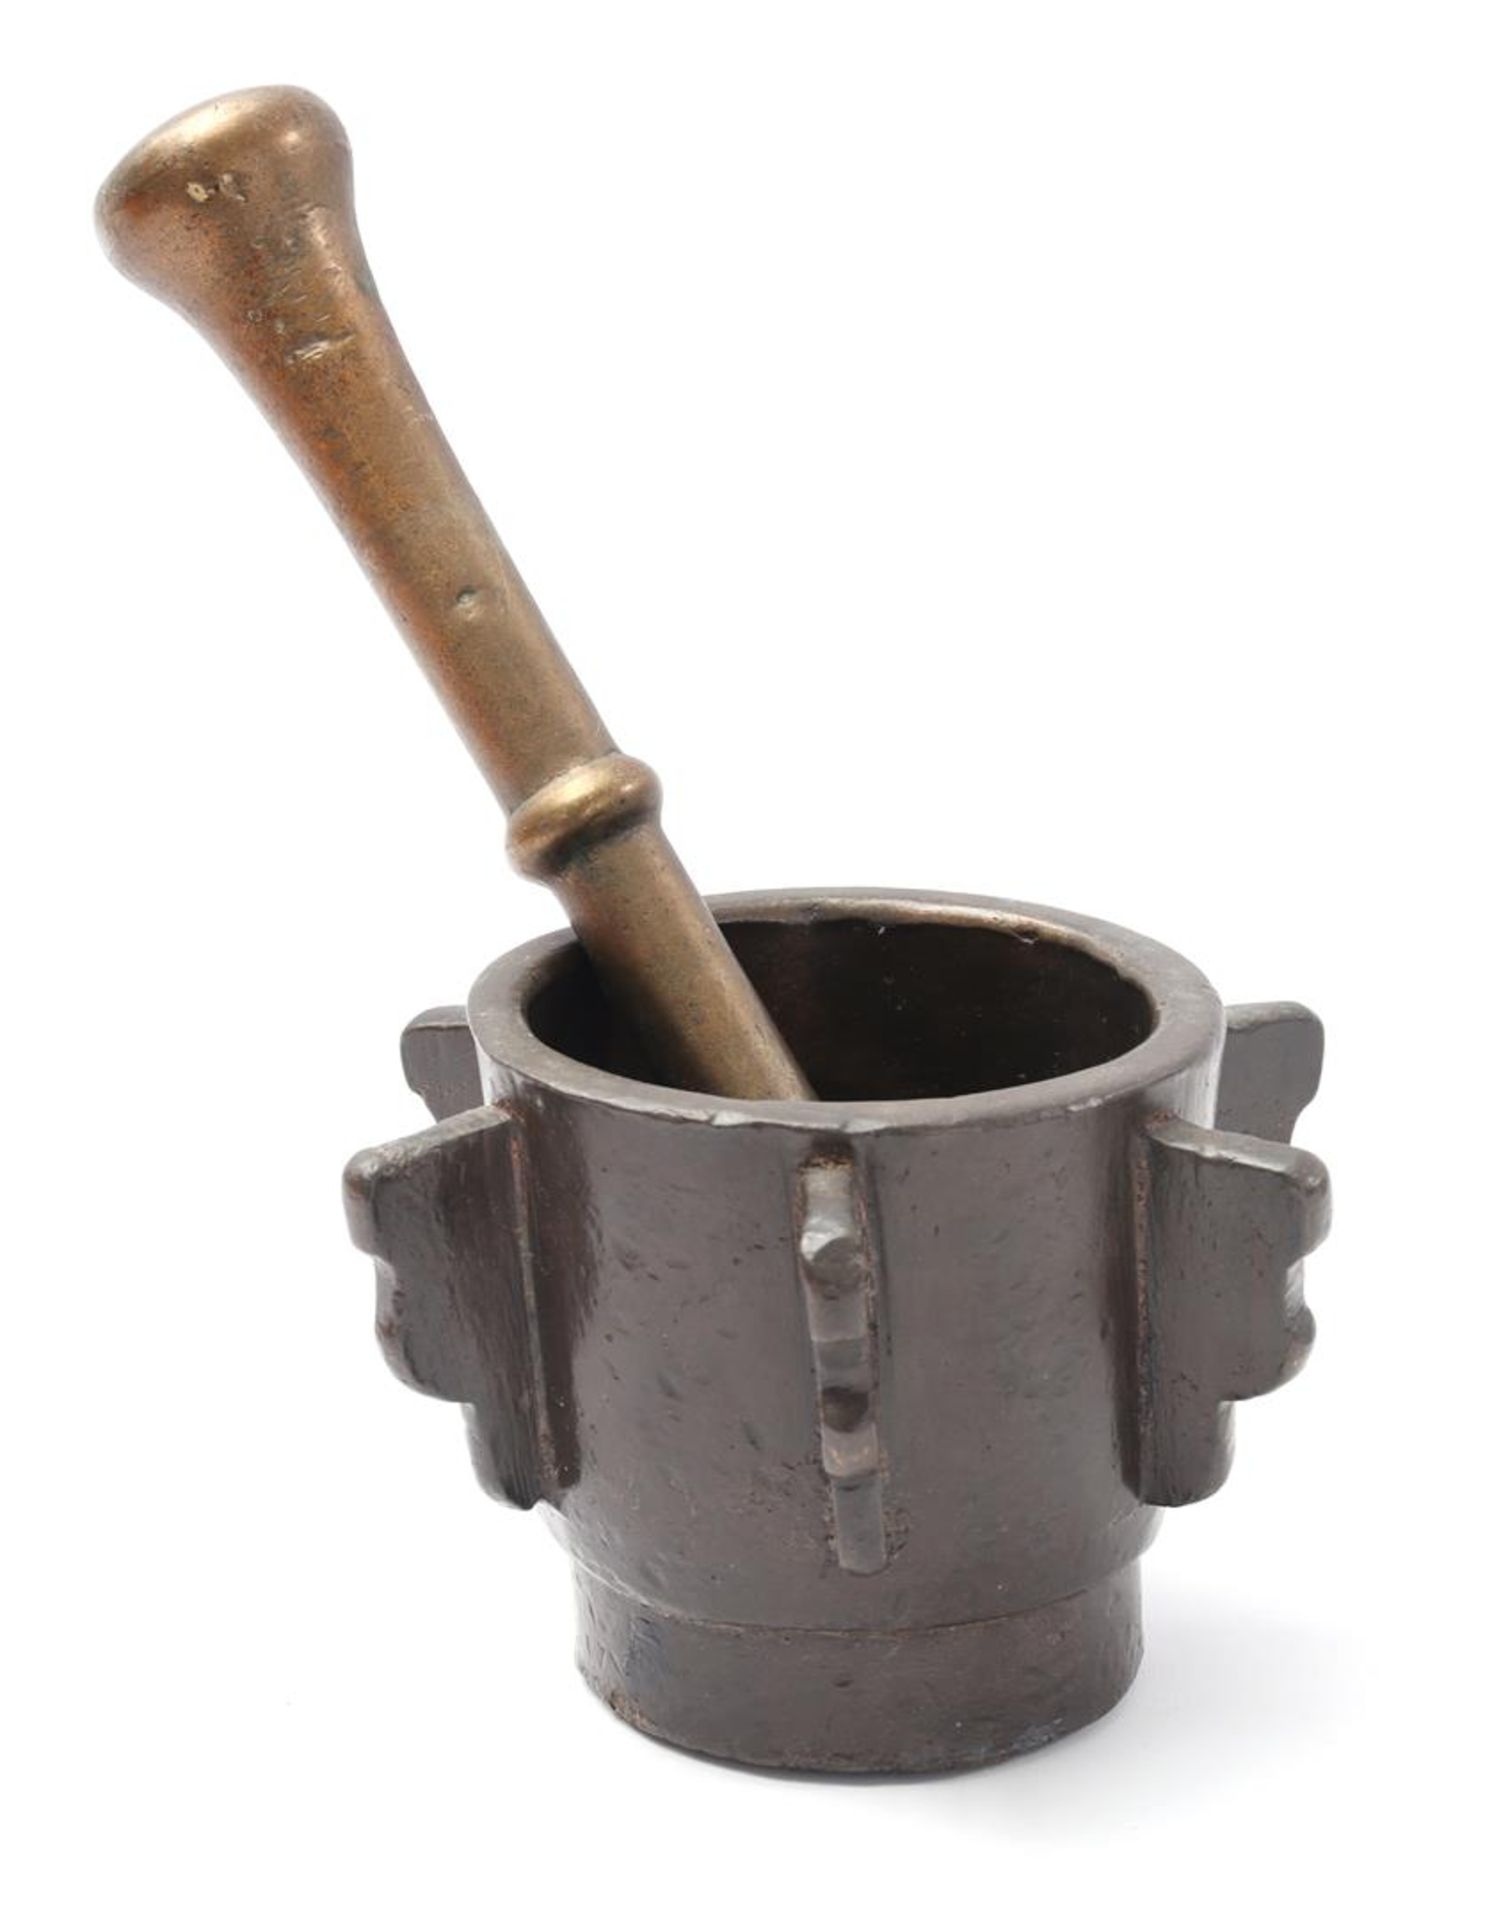 Bronze mortar with pestle